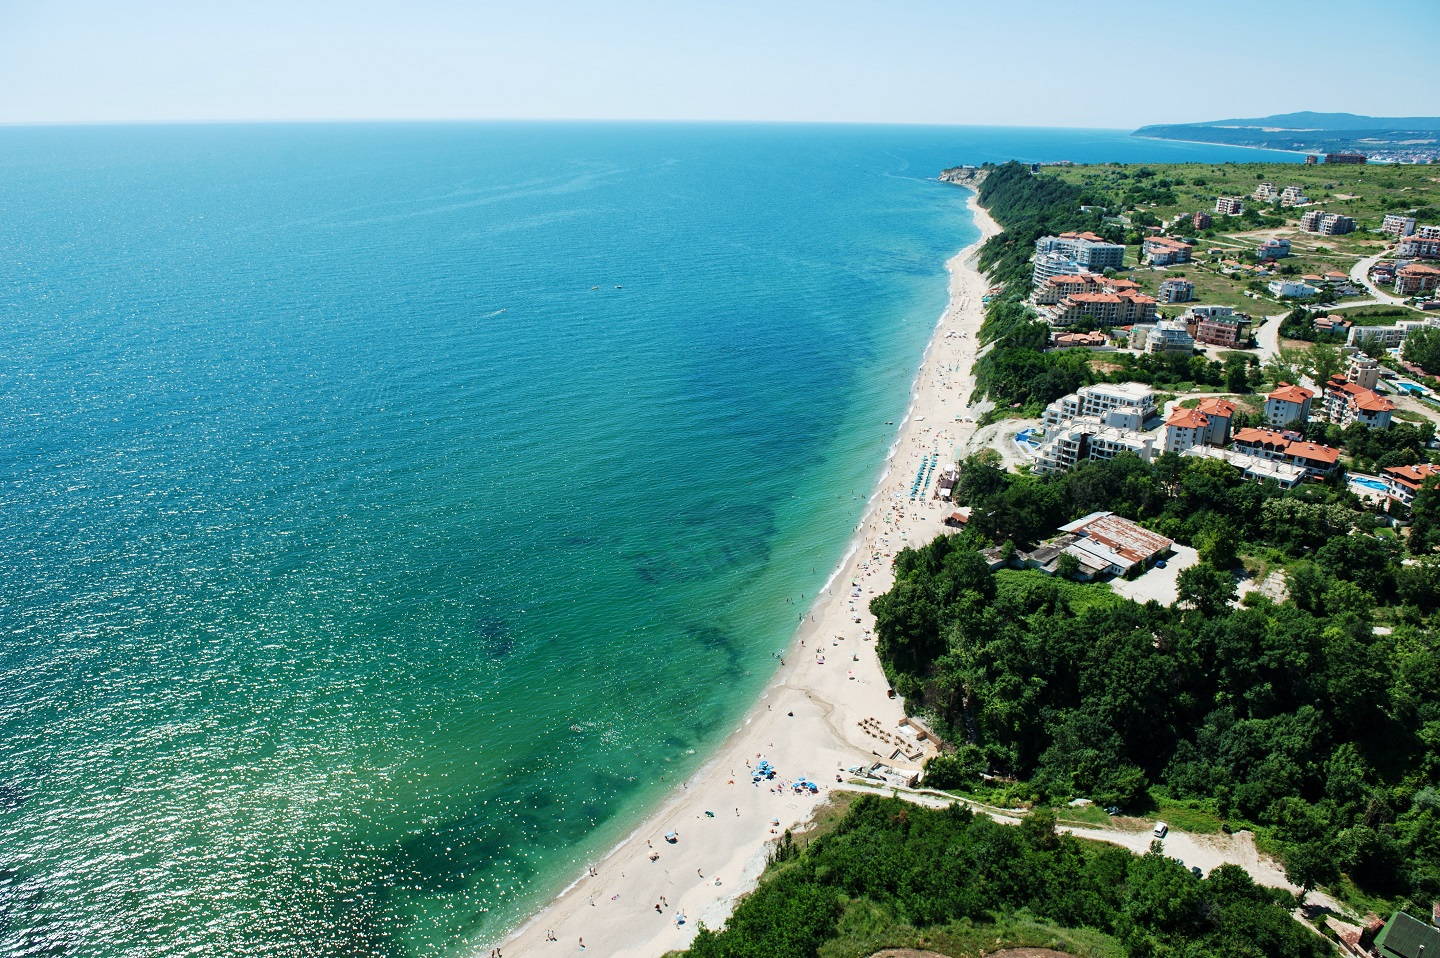 The beach of Byala from above